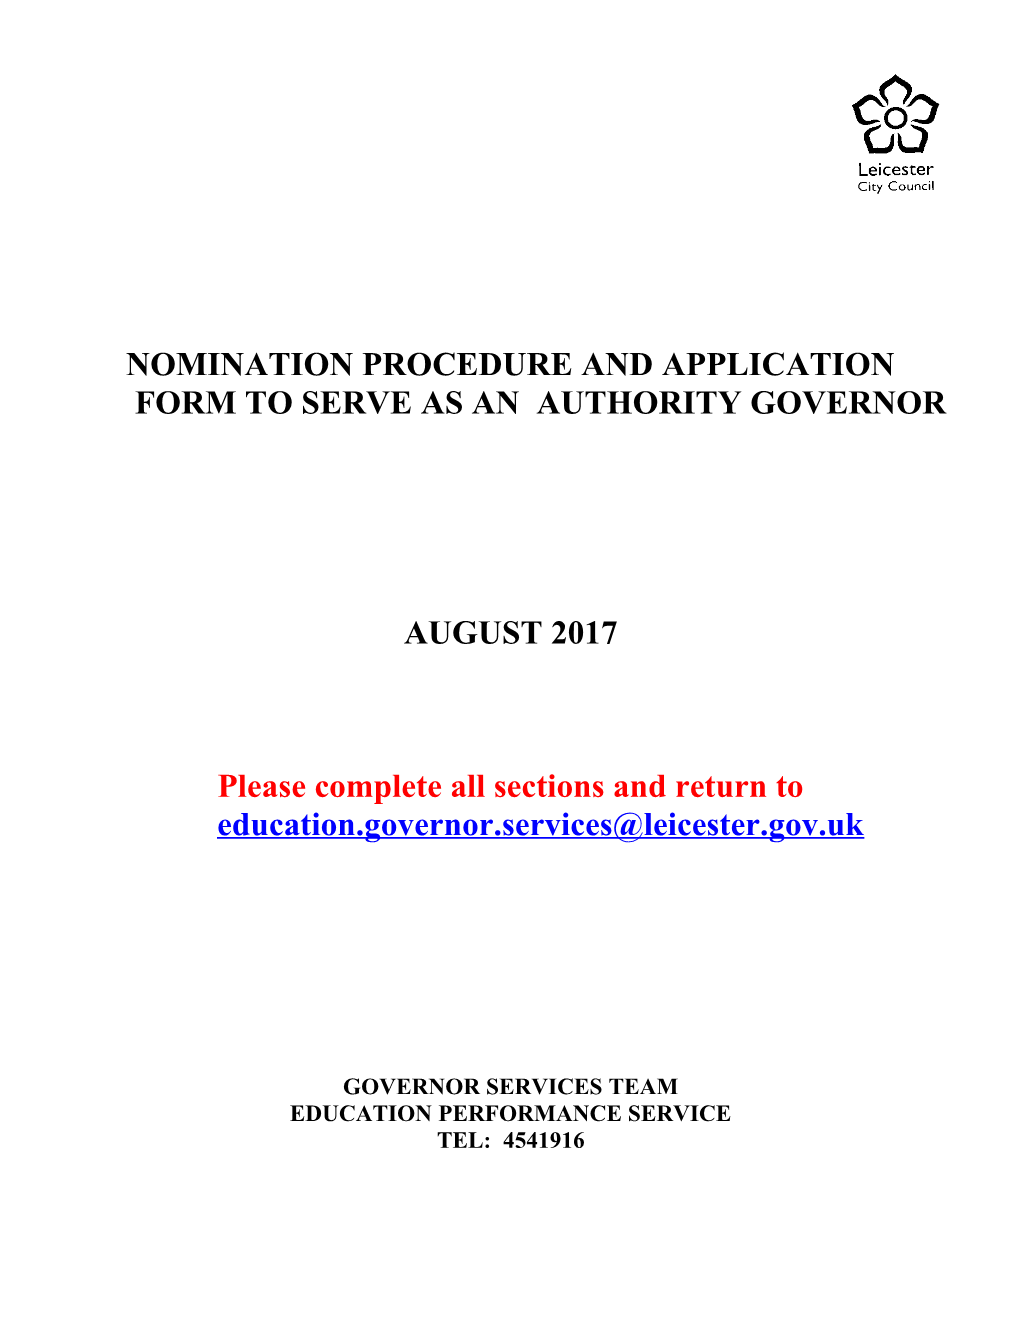 Nomination Procedure and Application Form to Serve As an Authority Governor